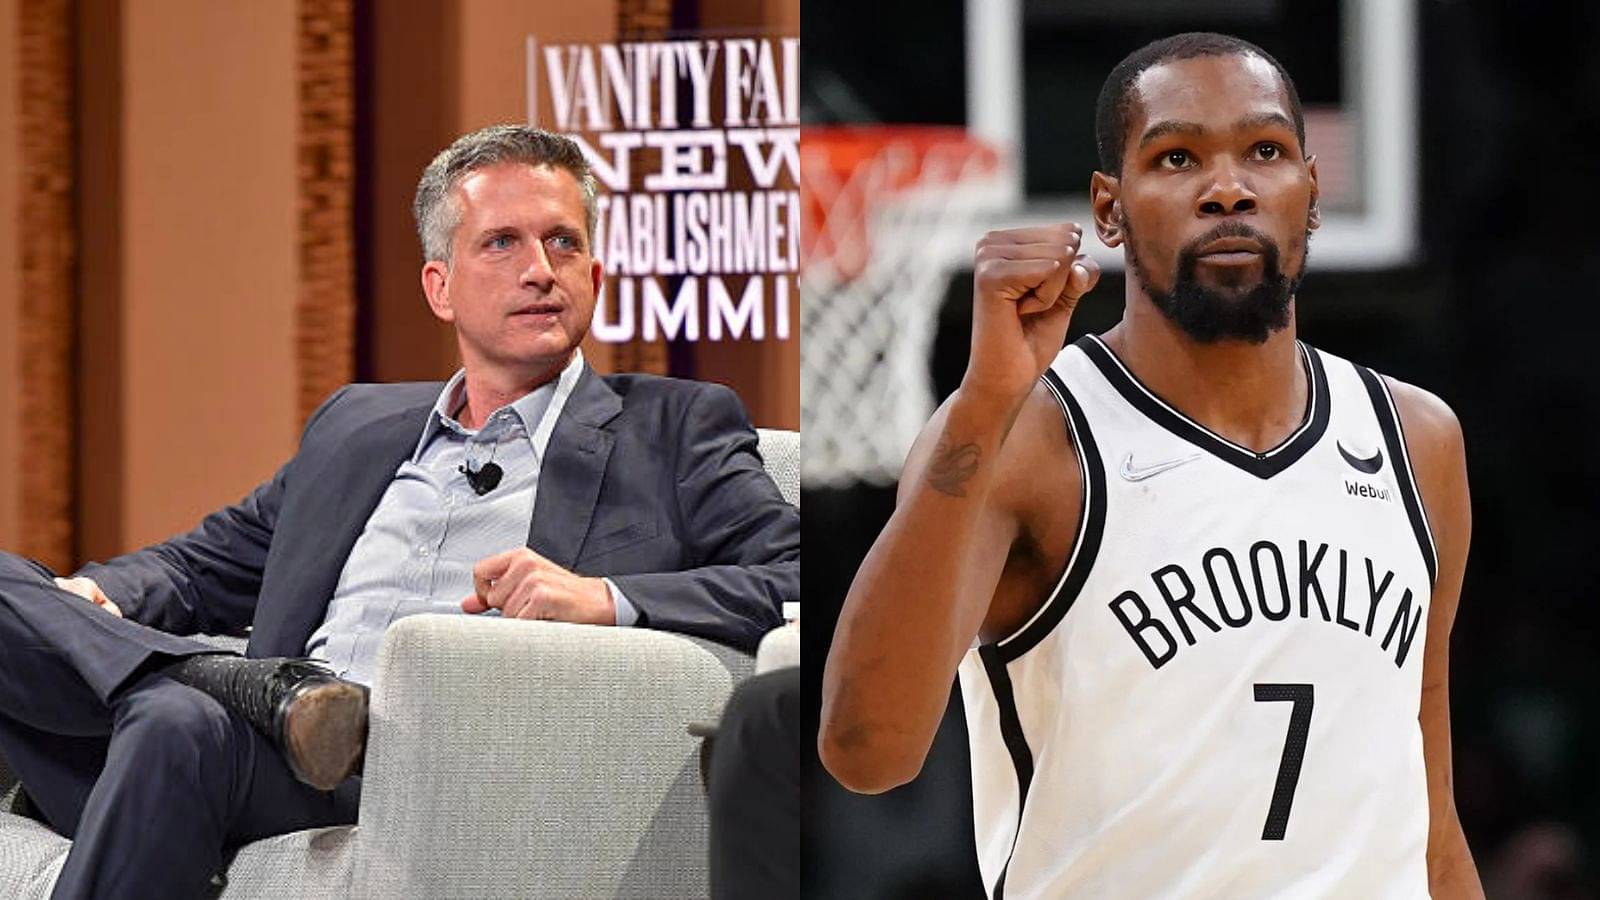 $100M Bill Simmons goes after Kevin Durant and the Nets, thanks them sarcastically for last two months’ drama and free content